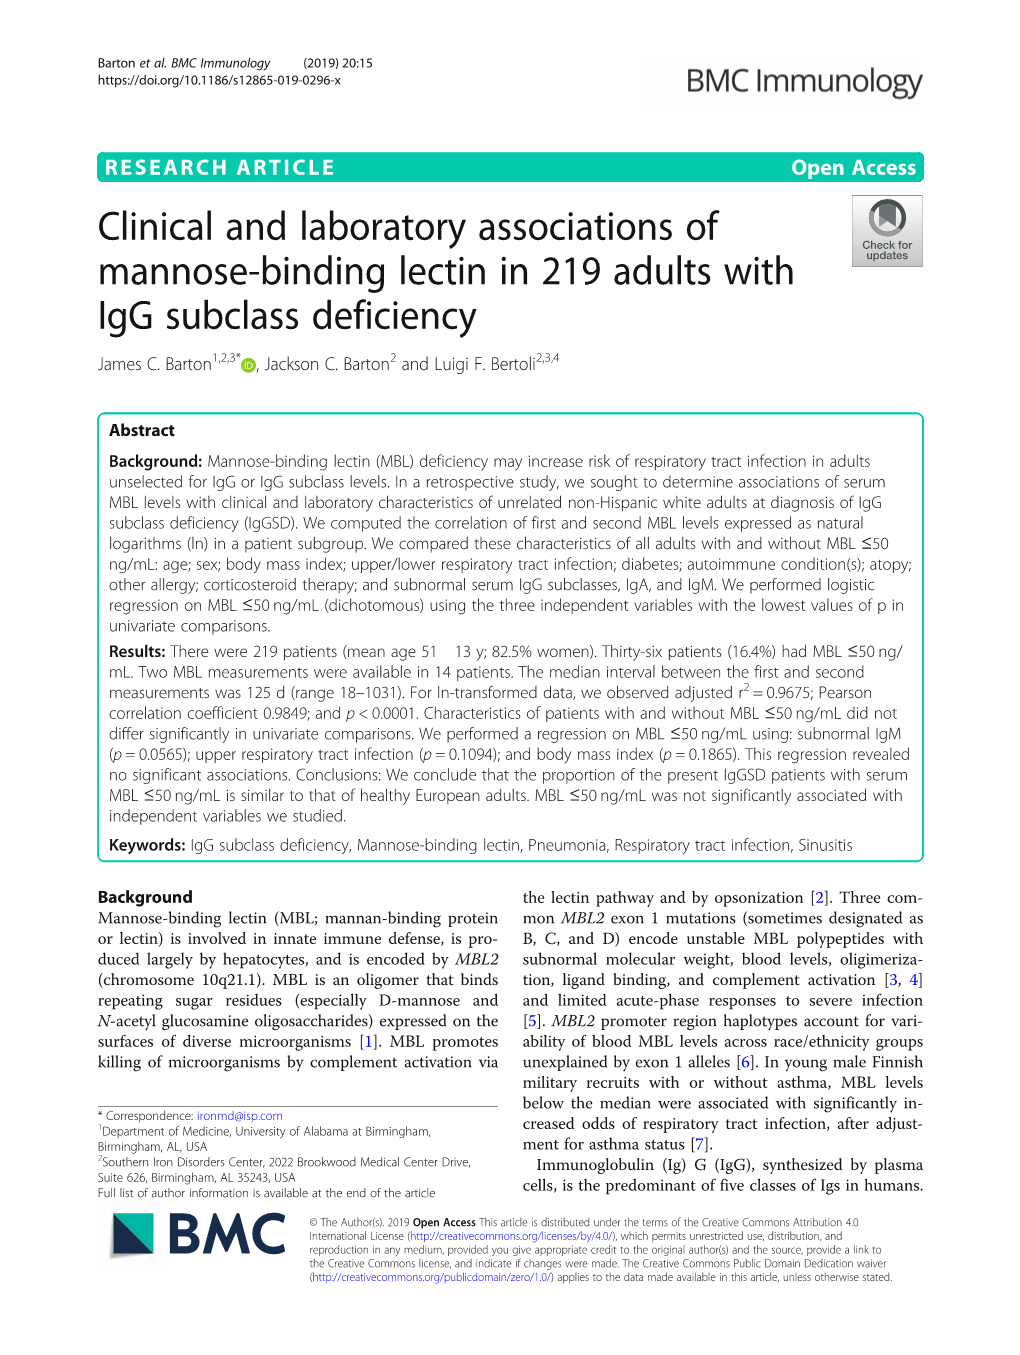 Clinical and Laboratory Associations of Mannose-Binding Lectin in 219 Adults with Igg Subclass Deficiency James C